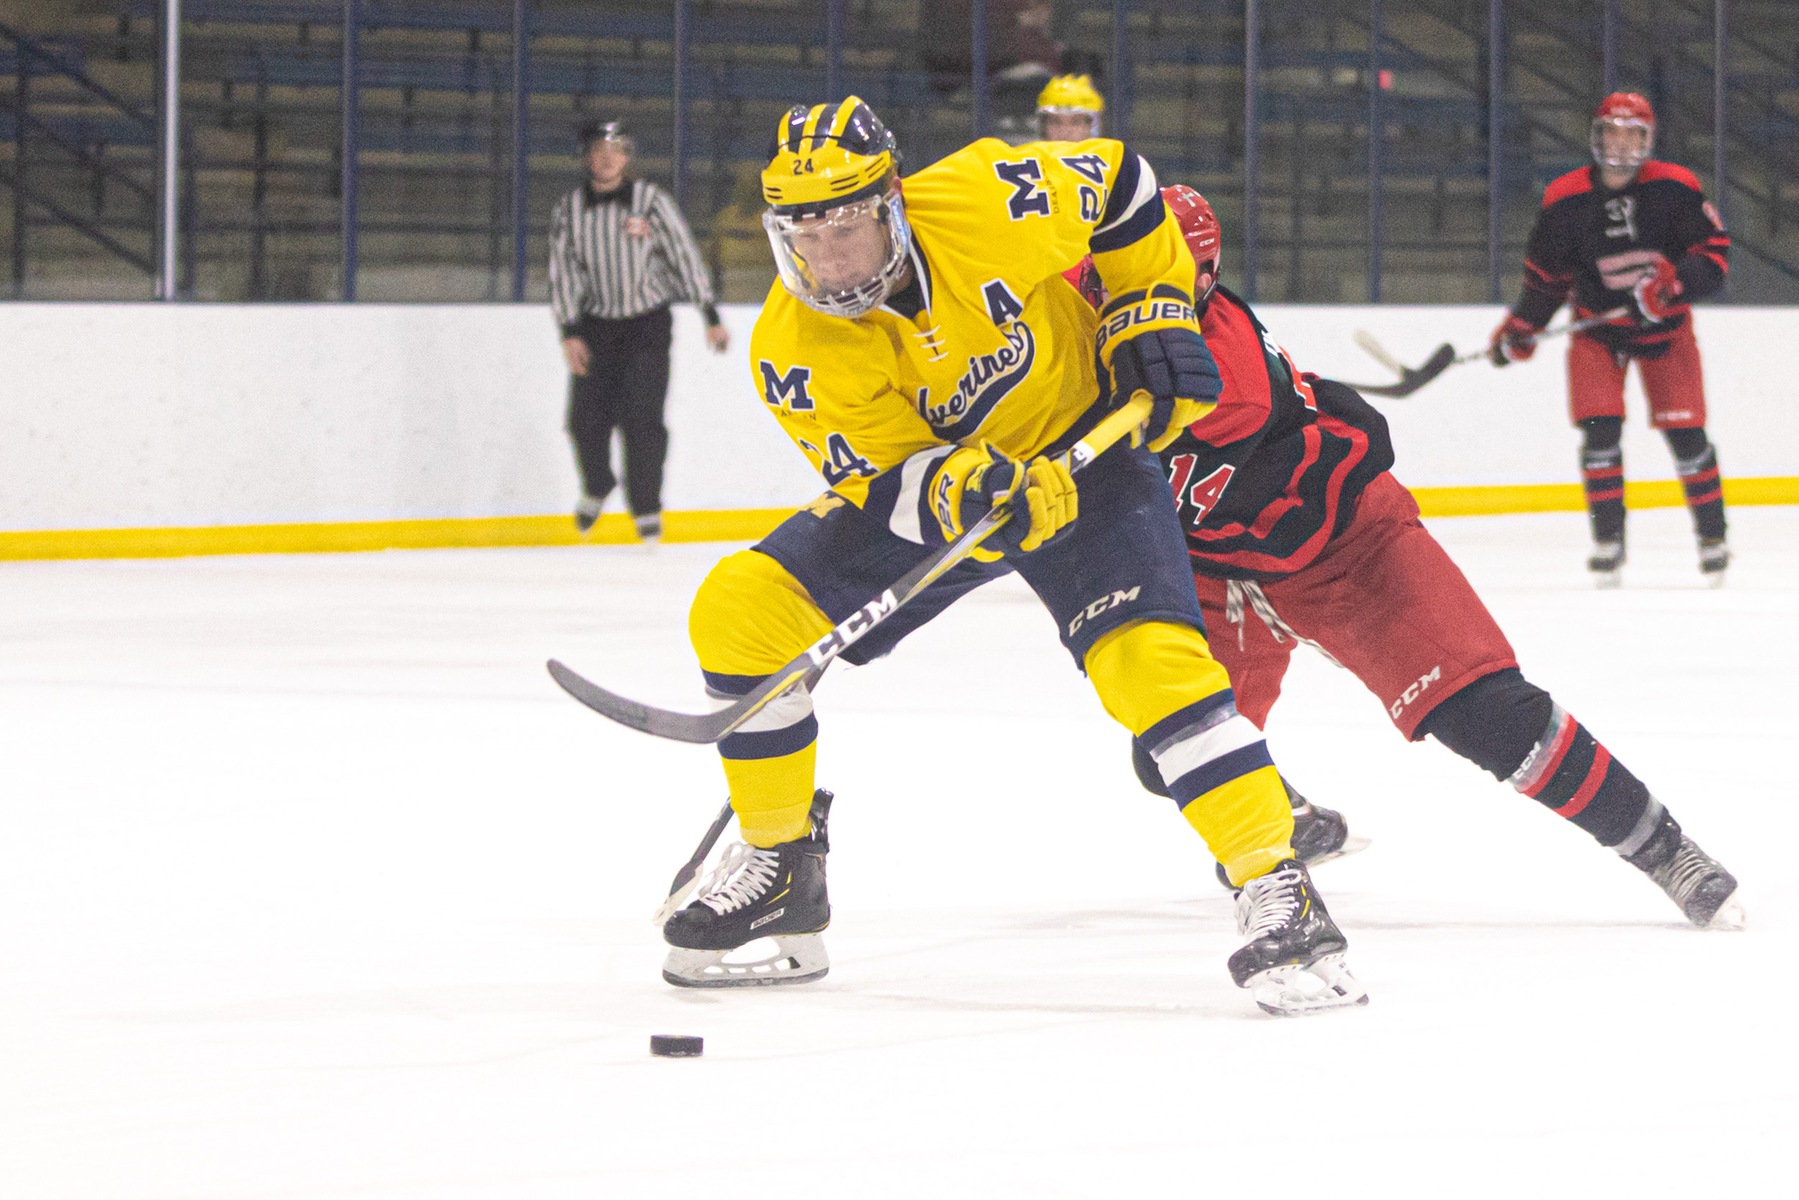 Wolverines shutout Saints in back-to-back games for series sweep